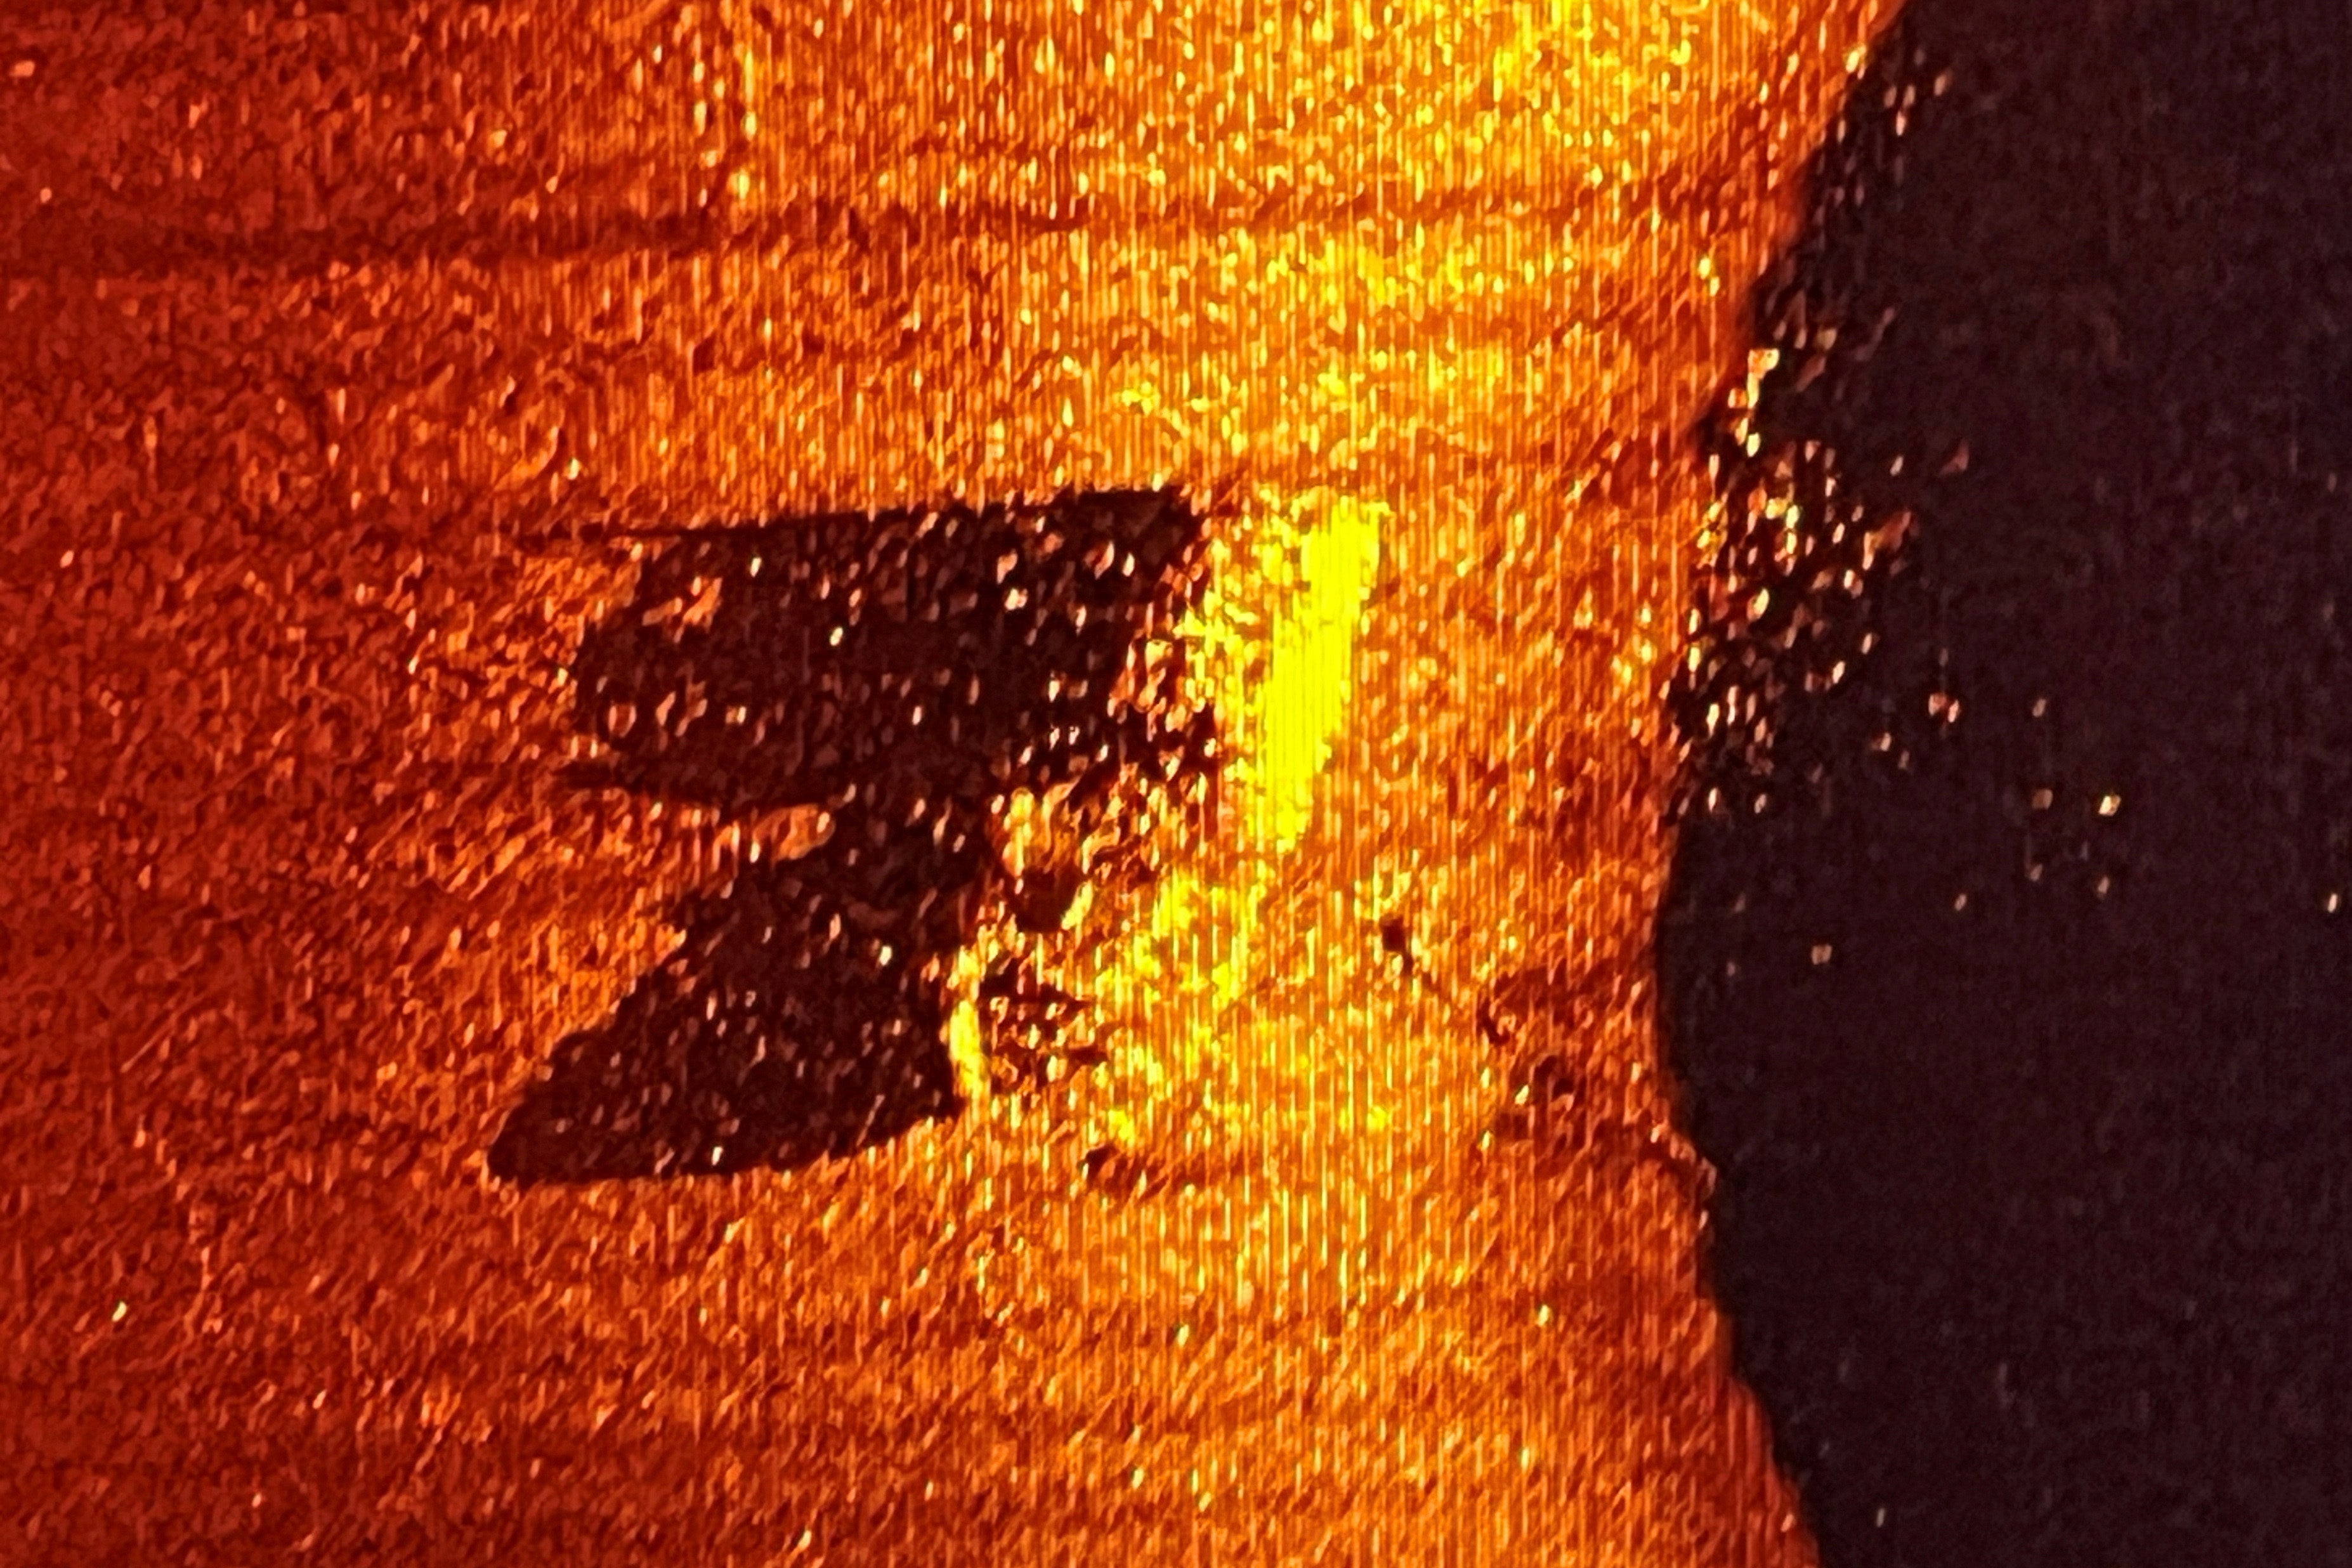 A side-scan sonar image shows the wreck of Quest, Sir Ernest Shackleton’s last expedition ship, as it lies upright and intact on the seabed at a depth of 390 metres northwest of St John’s, Newfoundland after sinking more than 100 years ago